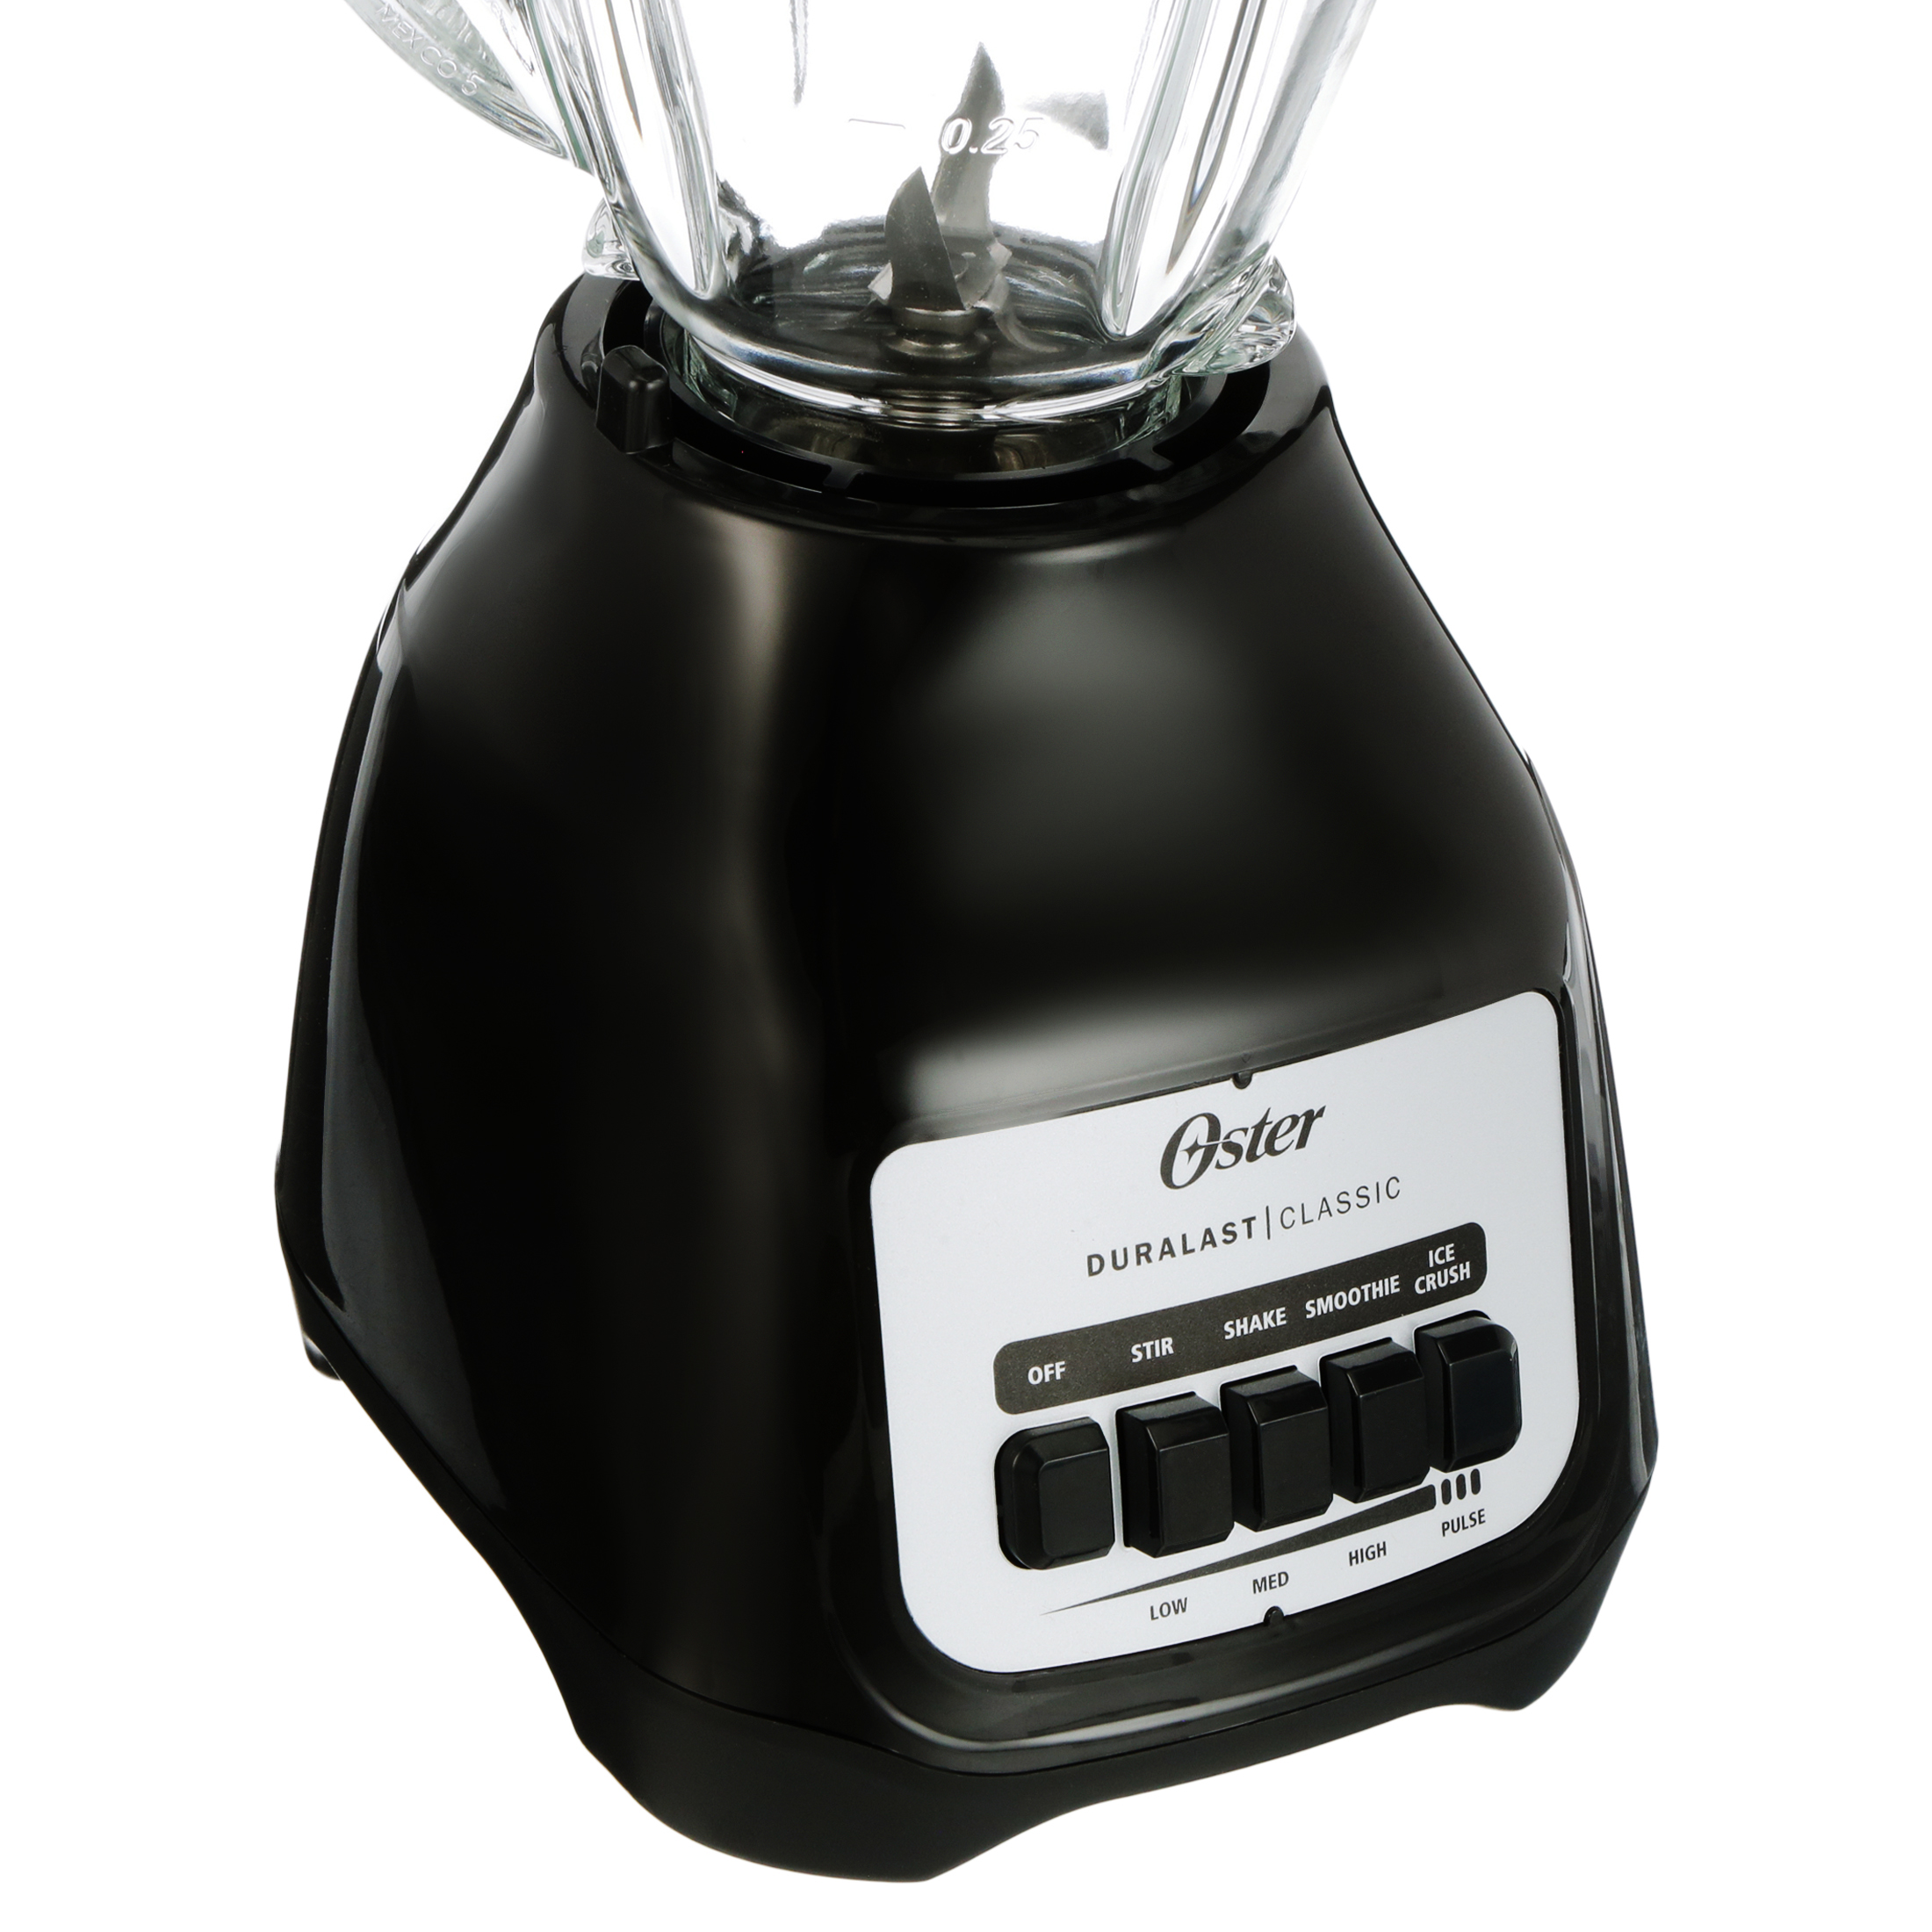 Oster Easy-to-Use Blender with 5-Speeds and 6-Cup Glass Jar, Black, New - image 3 of 9